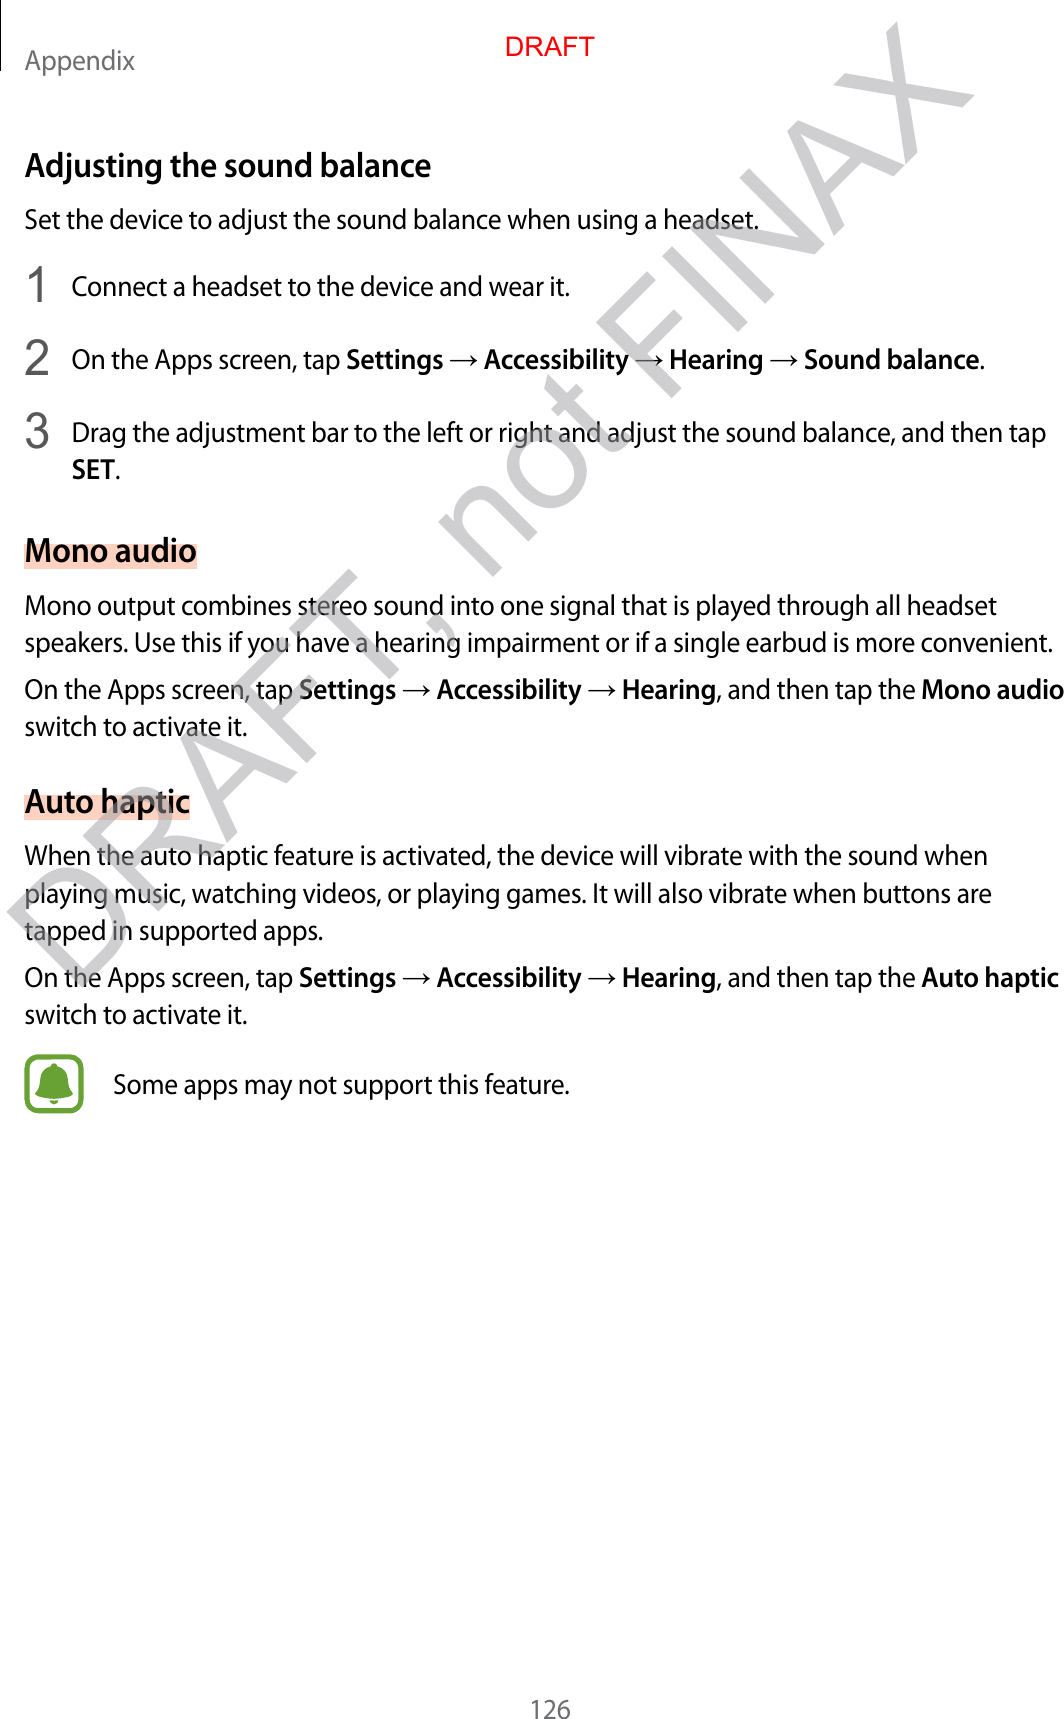 Appendix126Adjusting the sound balanceSet the device to adjust the sound balance when using a headset.1  Connect a headset to the device and wear it.2  On the Apps screen, tap Settings  Accessibility  Hearing  Sound balance.3  Drag the adjustment bar to the left or right and adjust the sound balance, and then tap SET.Mono audioMono output combines stereo sound into one signal that is played through all headset speakers. Use this if you have a hearing impairment or if a single earbud is more convenient.On the Apps screen, tap Settings  Accessibility  Hearing, and then tap the Mono audio switch to activate it.Auto hapticWhen the auto haptic feature is activated, the device will vibrate with the sound when playing music, watching videos, or playing games. It will also vibrate when buttons are tapped in supported apps.On the Apps screen, tap Settings  Accessibility  Hearing, and then tap the Auto haptic switch to activate it.Some apps may not support this feature.DRAFTDRAFT, not FINAX